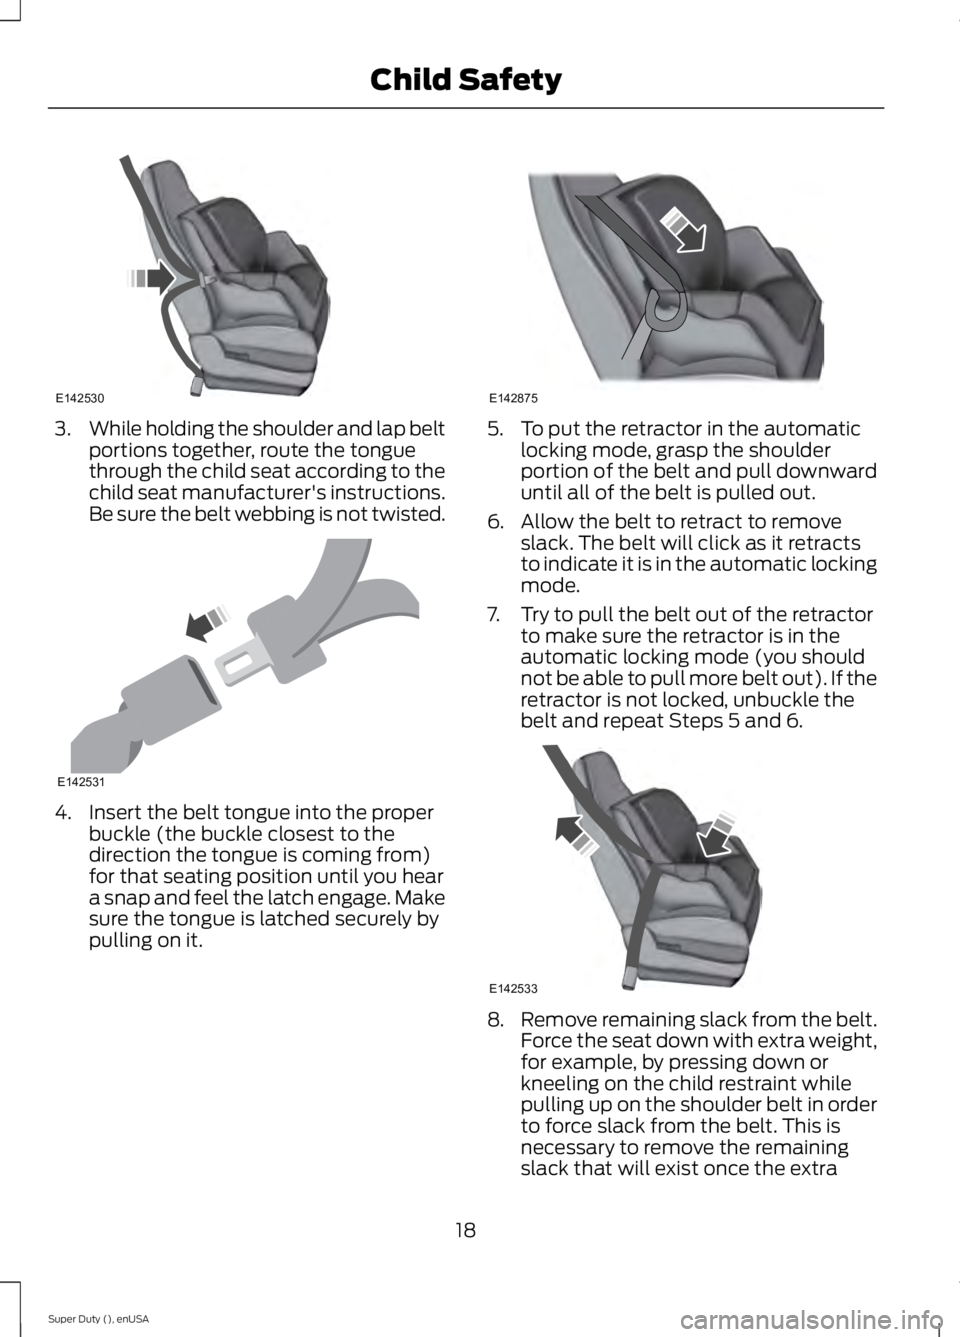 FORD F250 2015  Owners Manual 3.
While holding the shoulder and lap belt
portions together, route the tongue
through the child seat according to the
child seat manufacturer's instructions.
Be sure the belt webbing is not twist